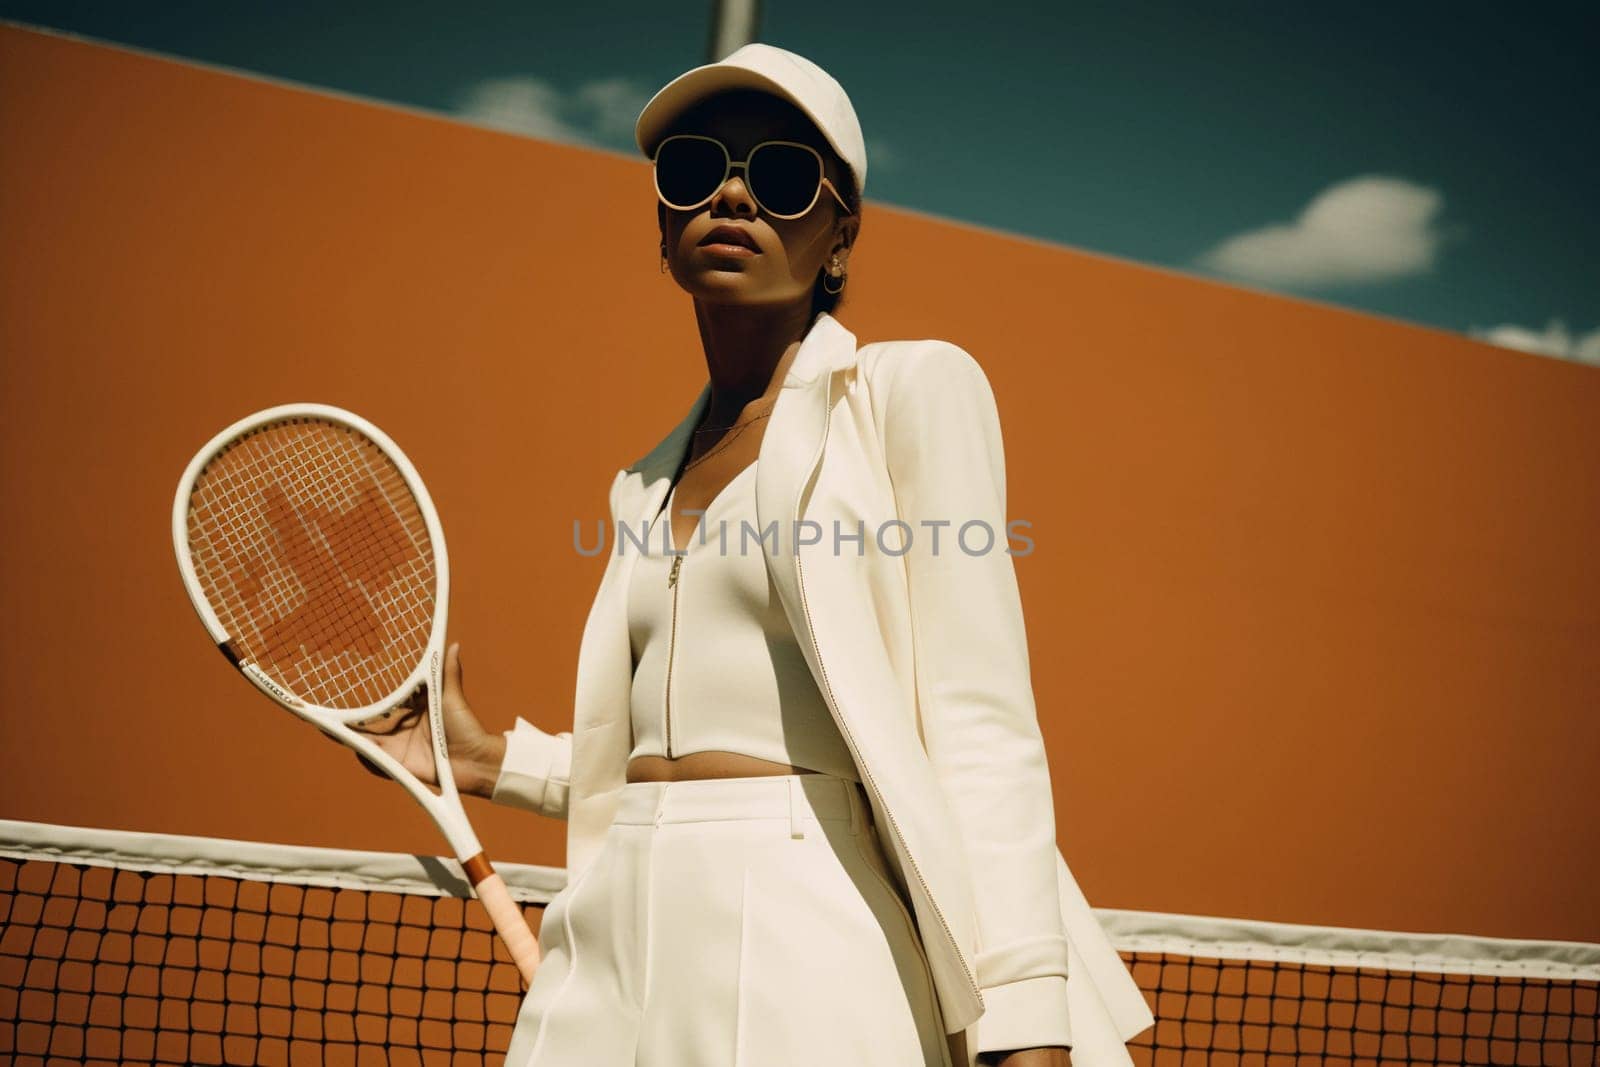 A woman wearing a white outfit holds a tennis racket in front of a orange wall.